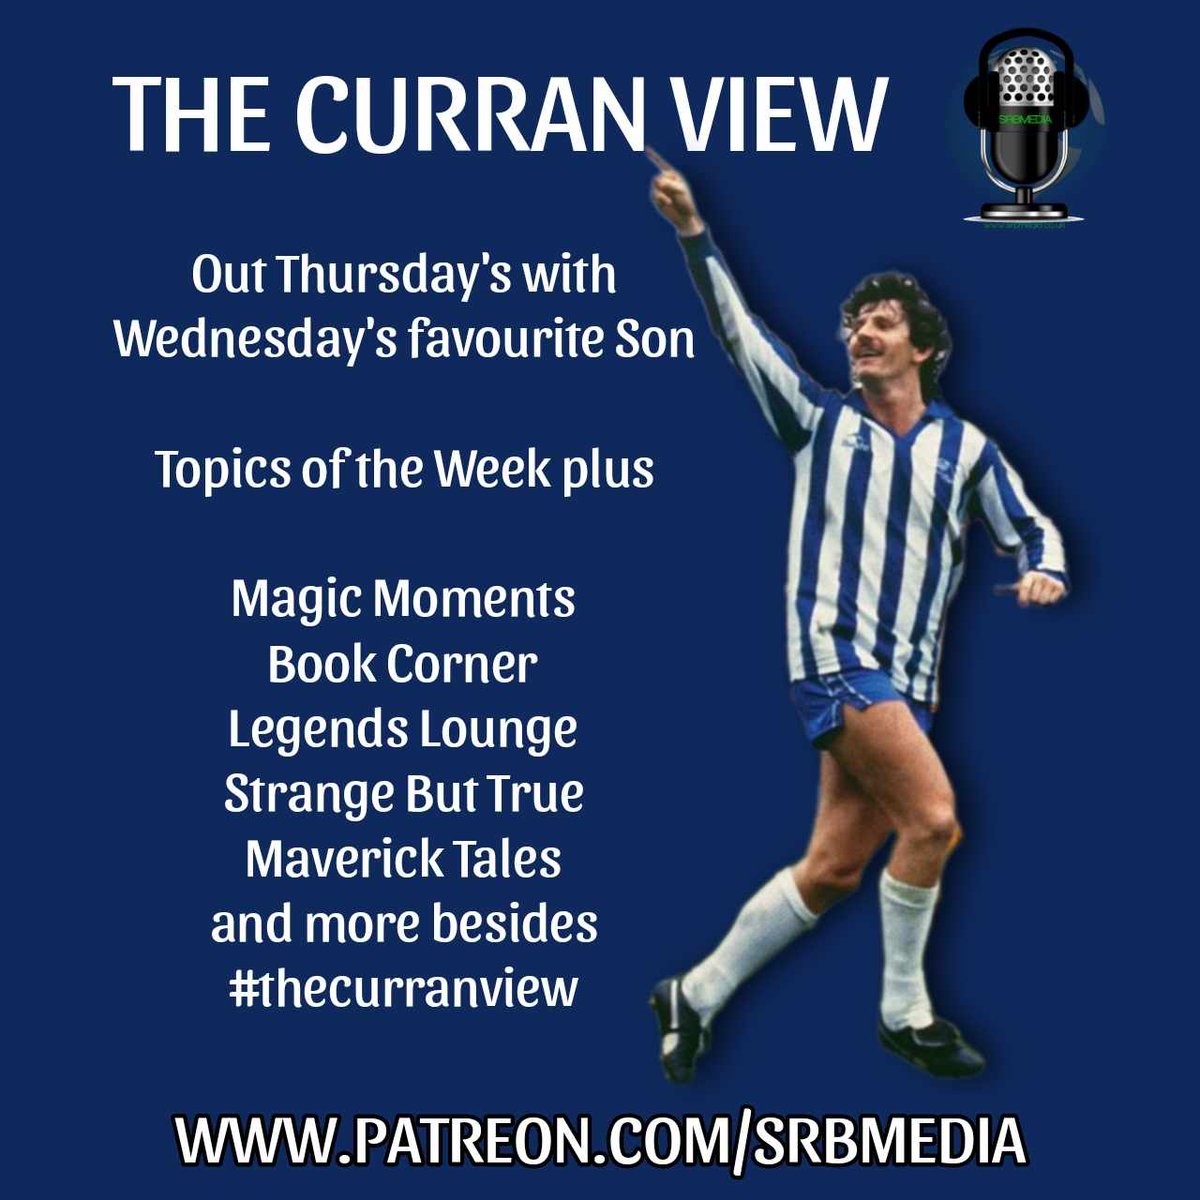 For £5 per month join the online Terry Curran Fan Club . patreon.com/srbmedia what you get ⚽️- An hour podcast per week The Curran View weekly podcast ⚽️- Your name featured on the podcast ⚽️- Submit a question for TC ⚽️- 10% off his range of merchandise .